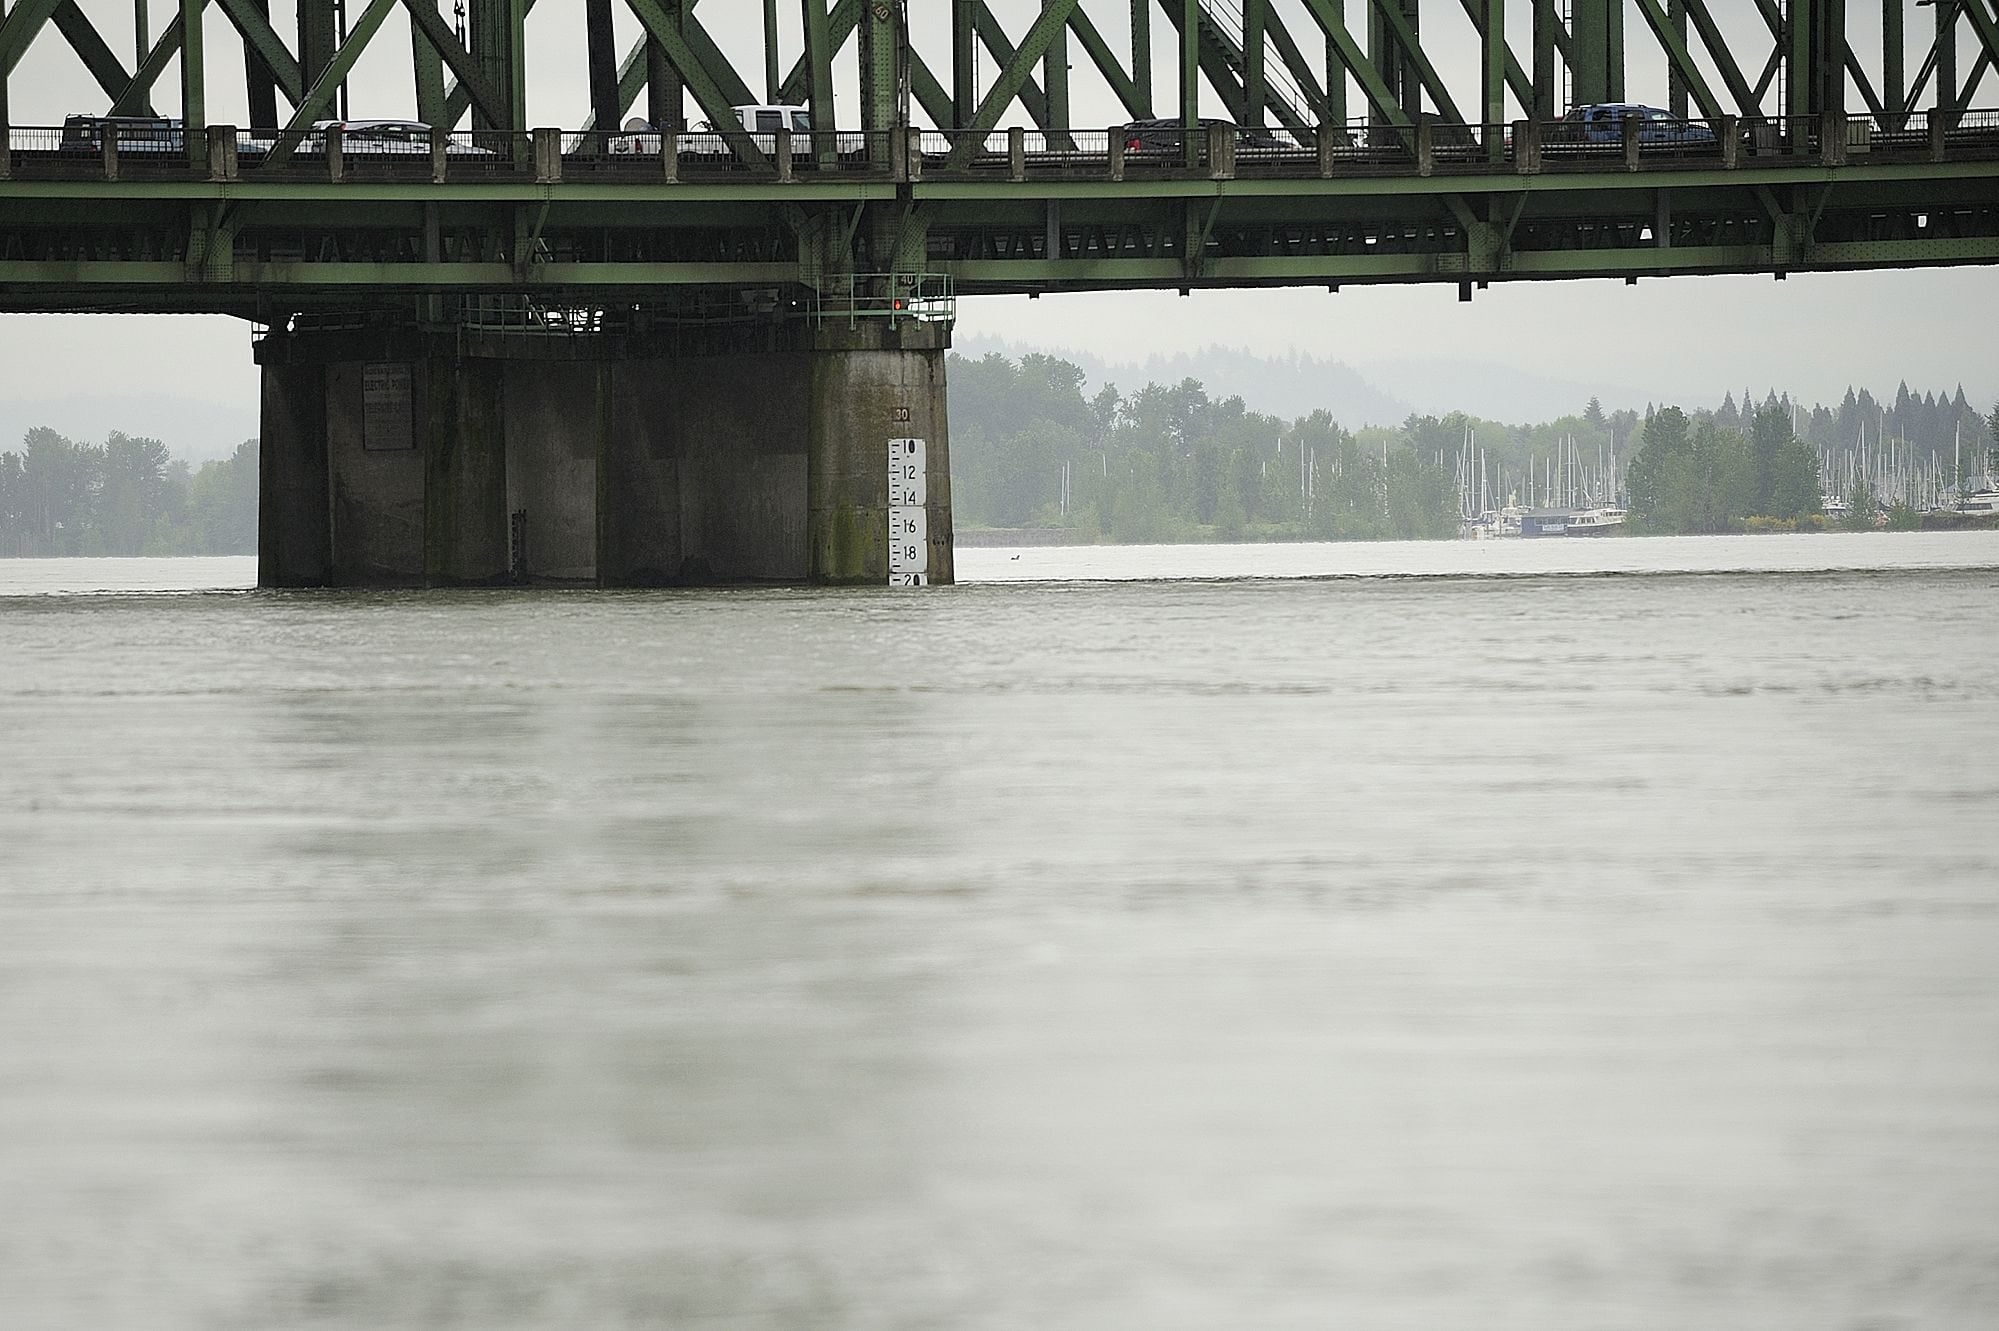 With the Columbia River rolling at more than 17 feet, more than a foot above flood stage on Tuesday, only minor flooding problems in very low-lying areas were reported.